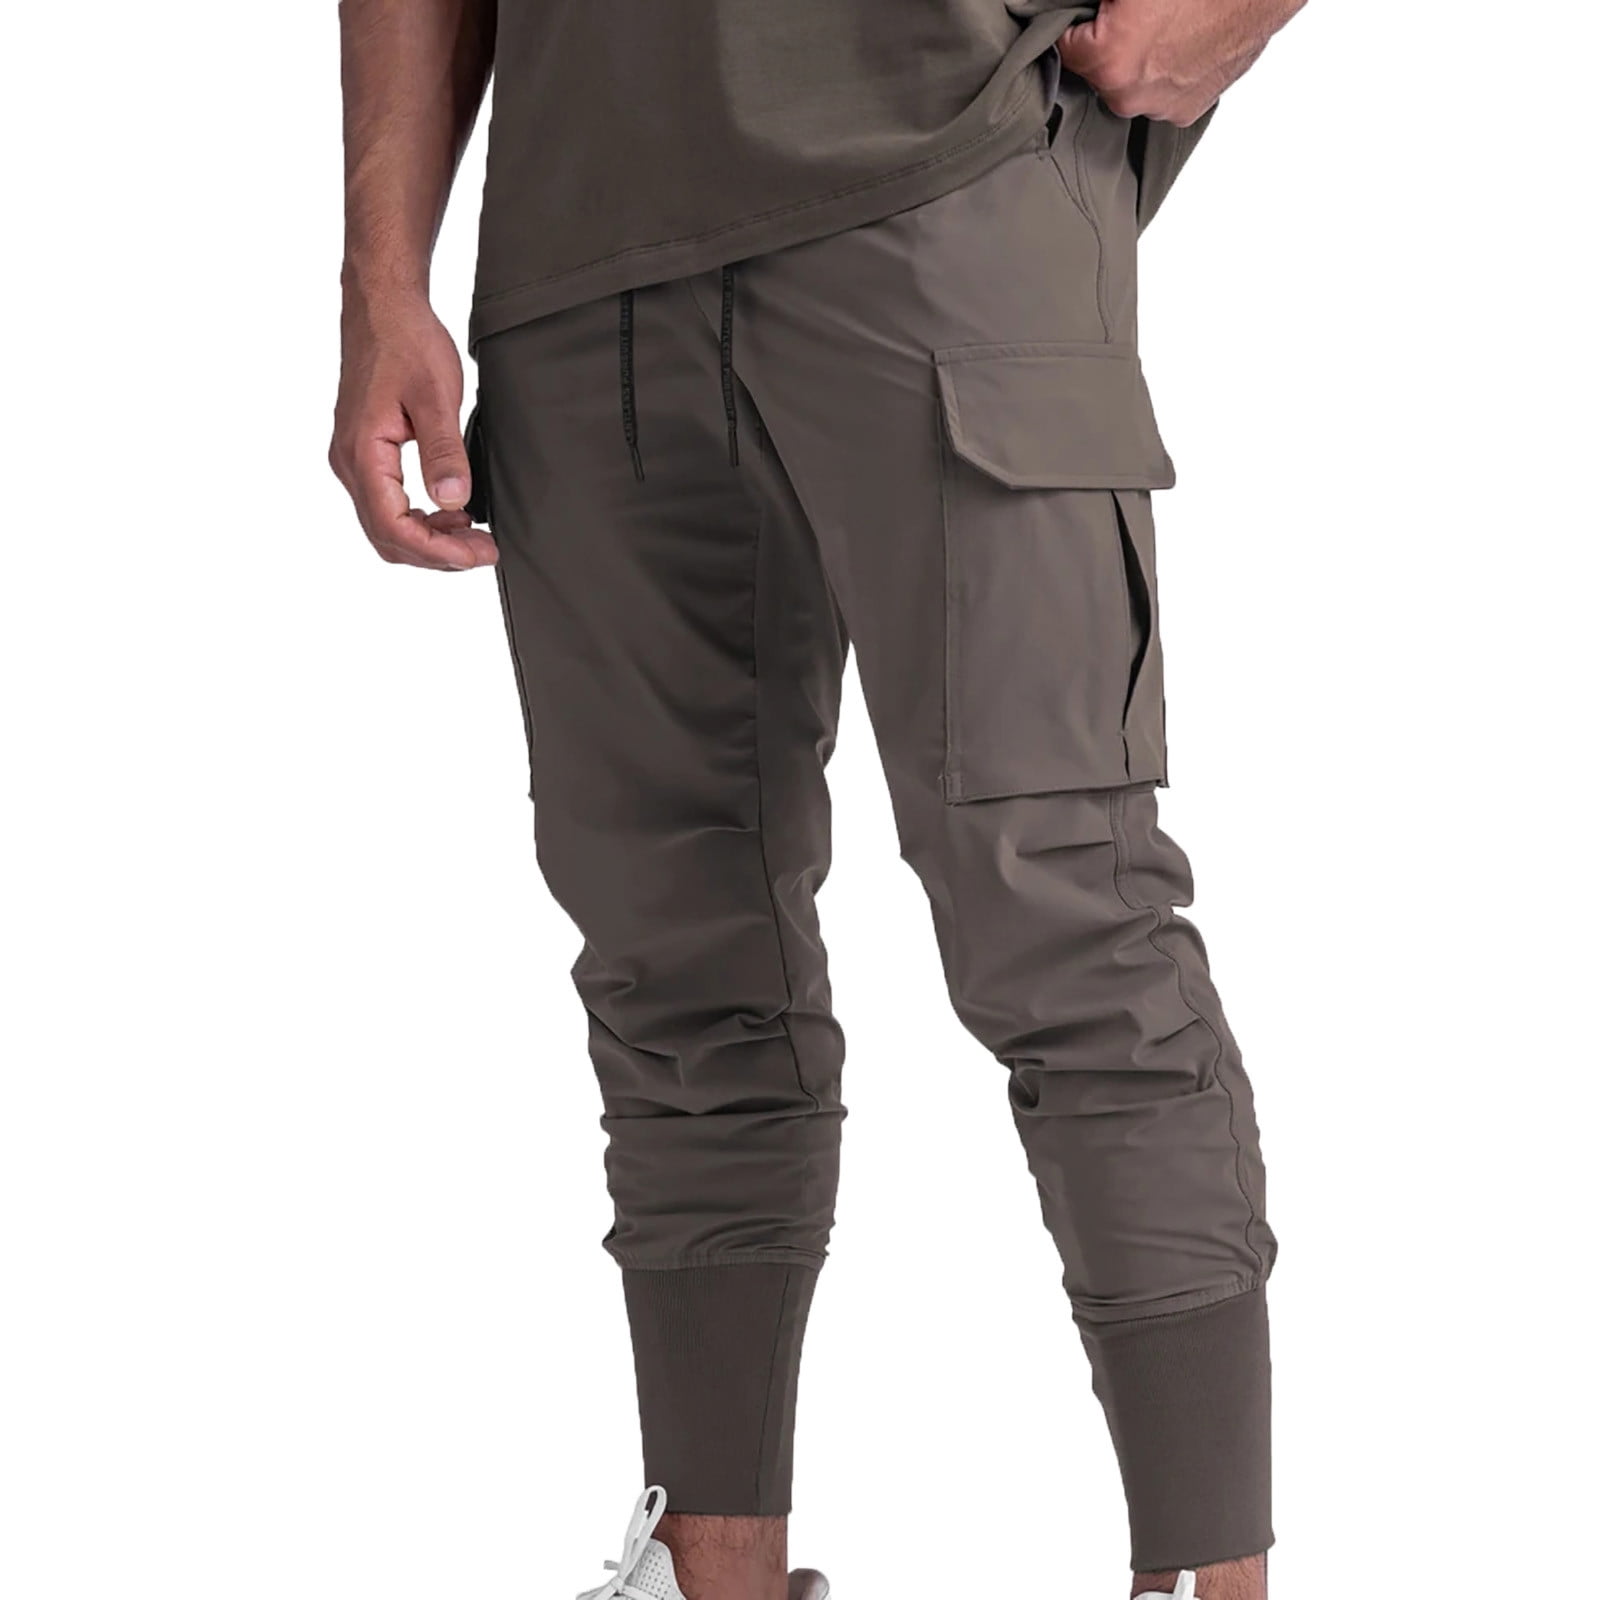 Cotonie Mens Sweatpants Solid Casual Jogger Pants Drawstring Outdoor  Fitness Pants Cargo Pants Trousers 